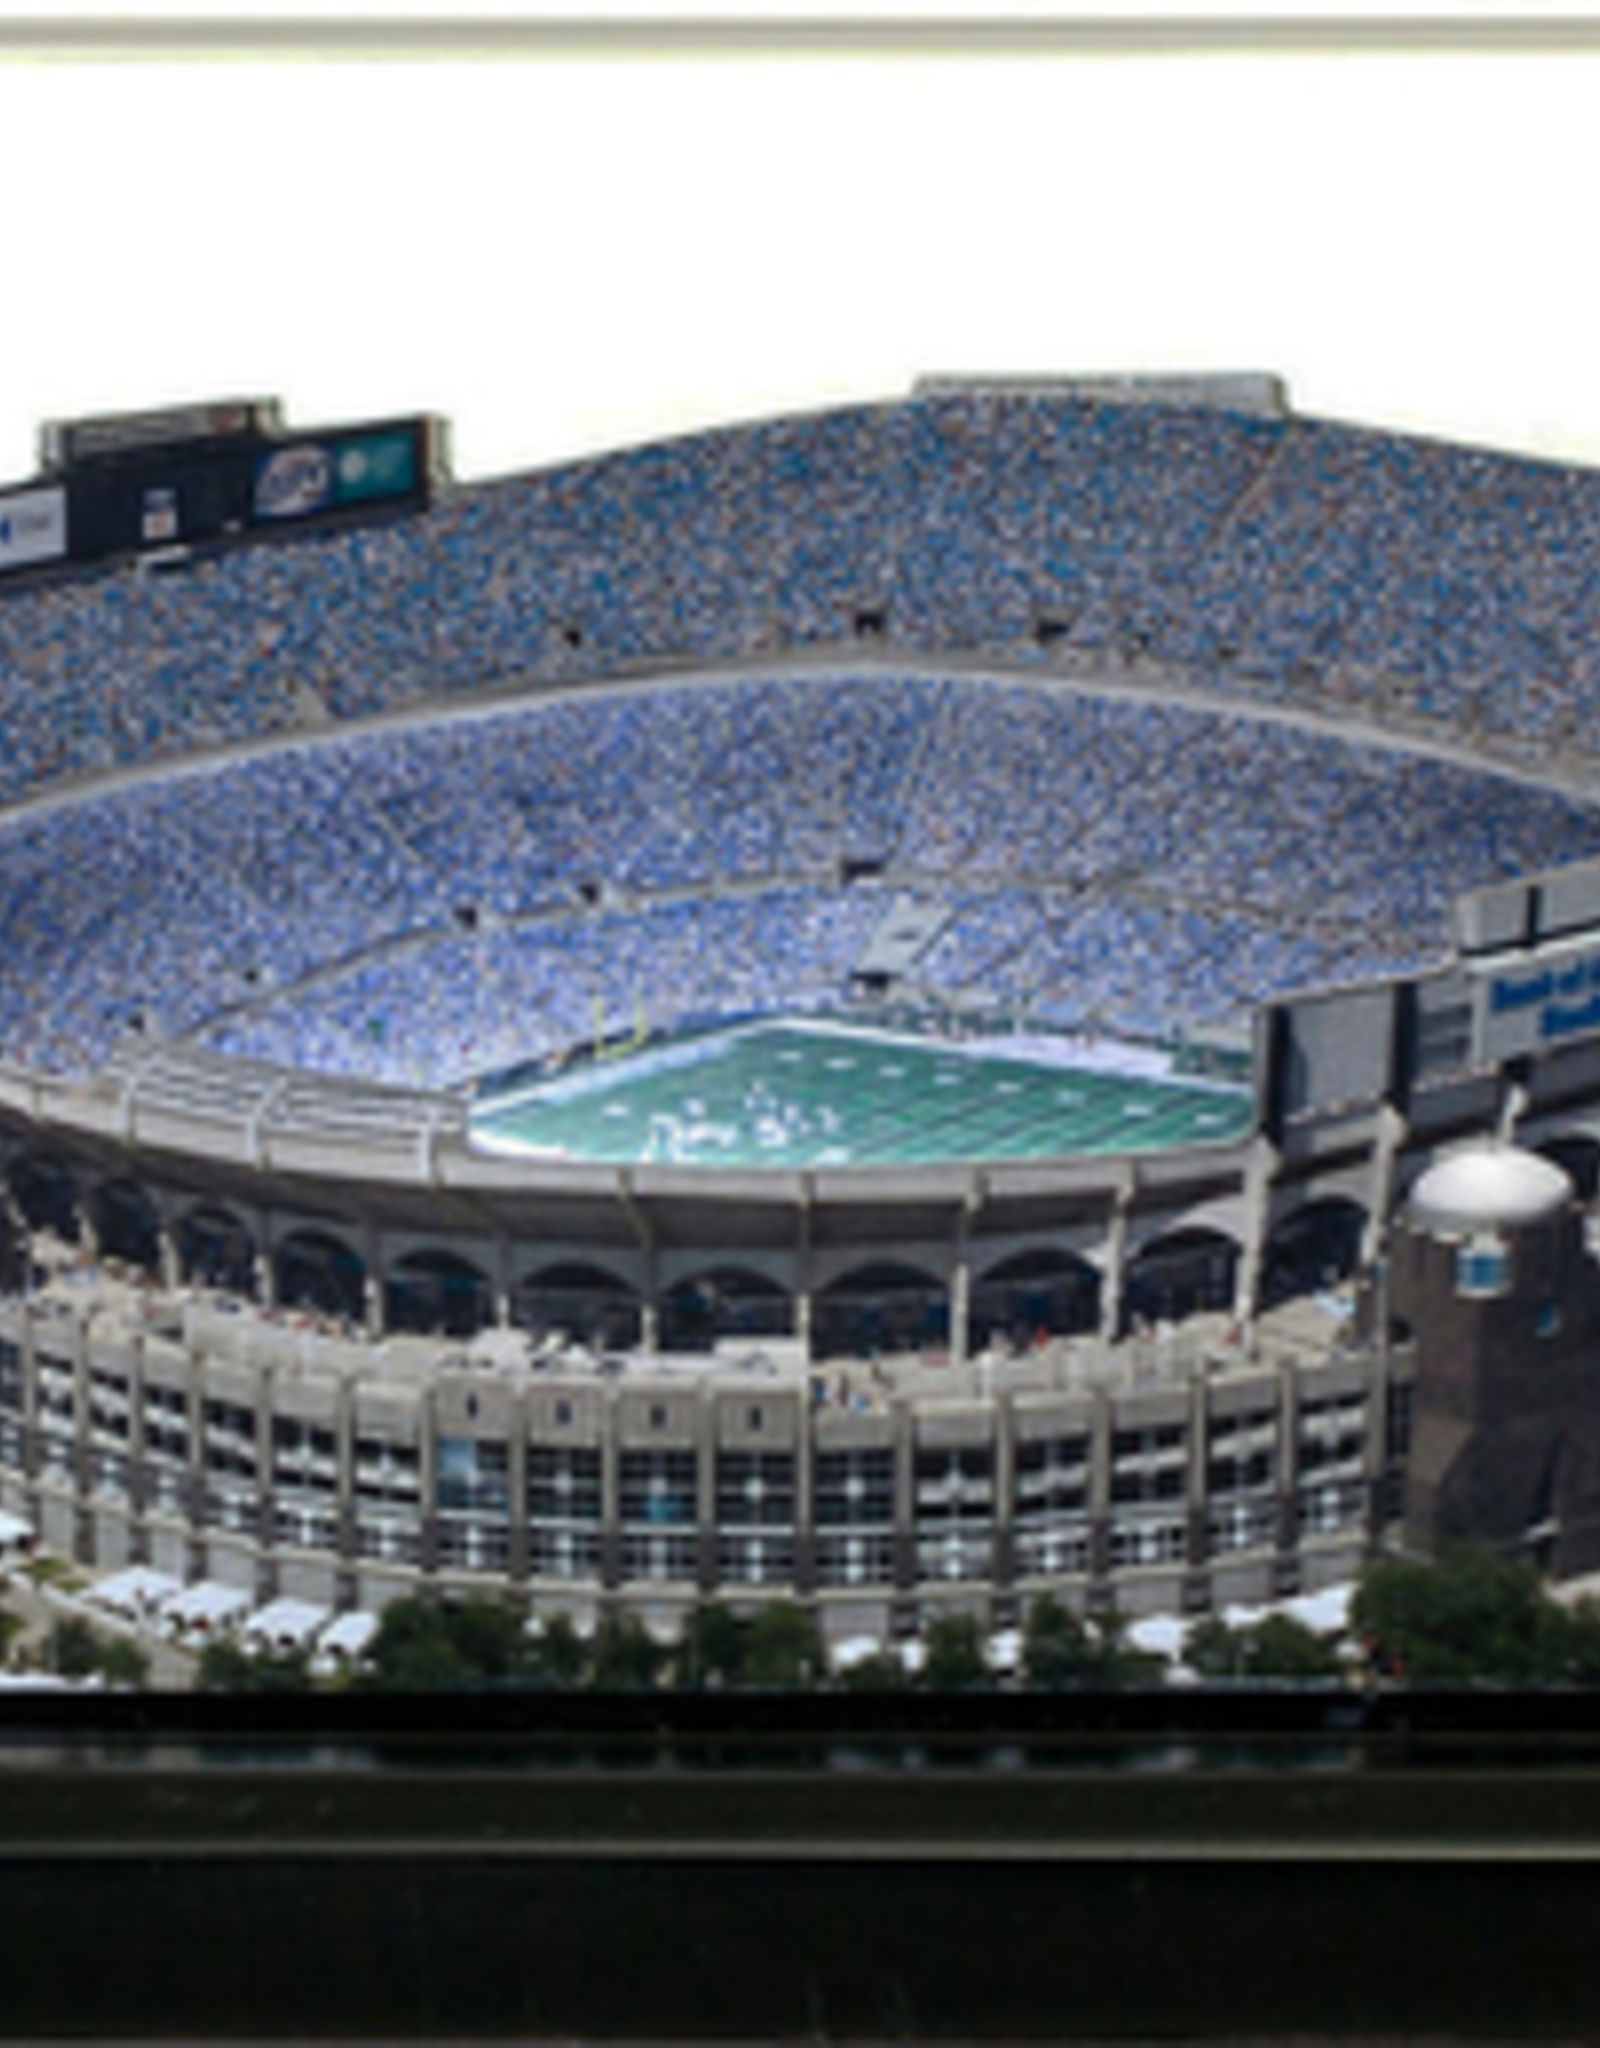 HOMEFIELDS Panthers HomeField - Bank of America Stadium 9IN